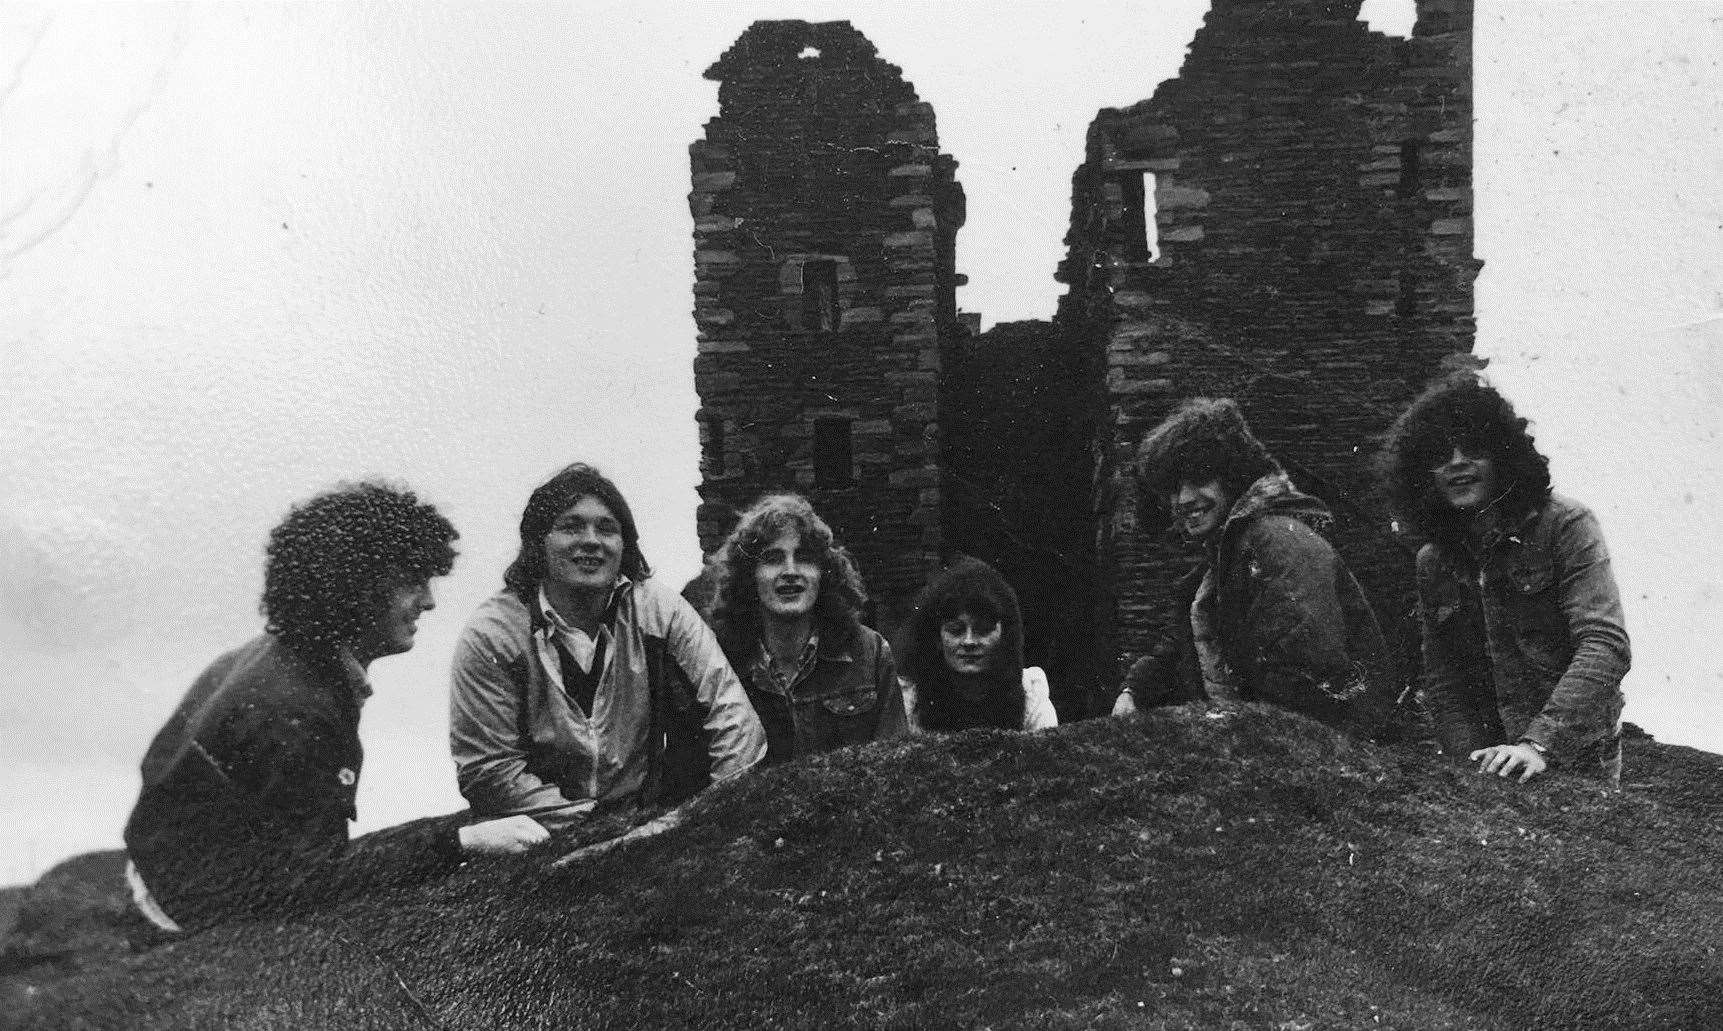 Local band II Bit Ram in a publicity shot at Castle Sinclair Girnigoe. Hugh is second from left.